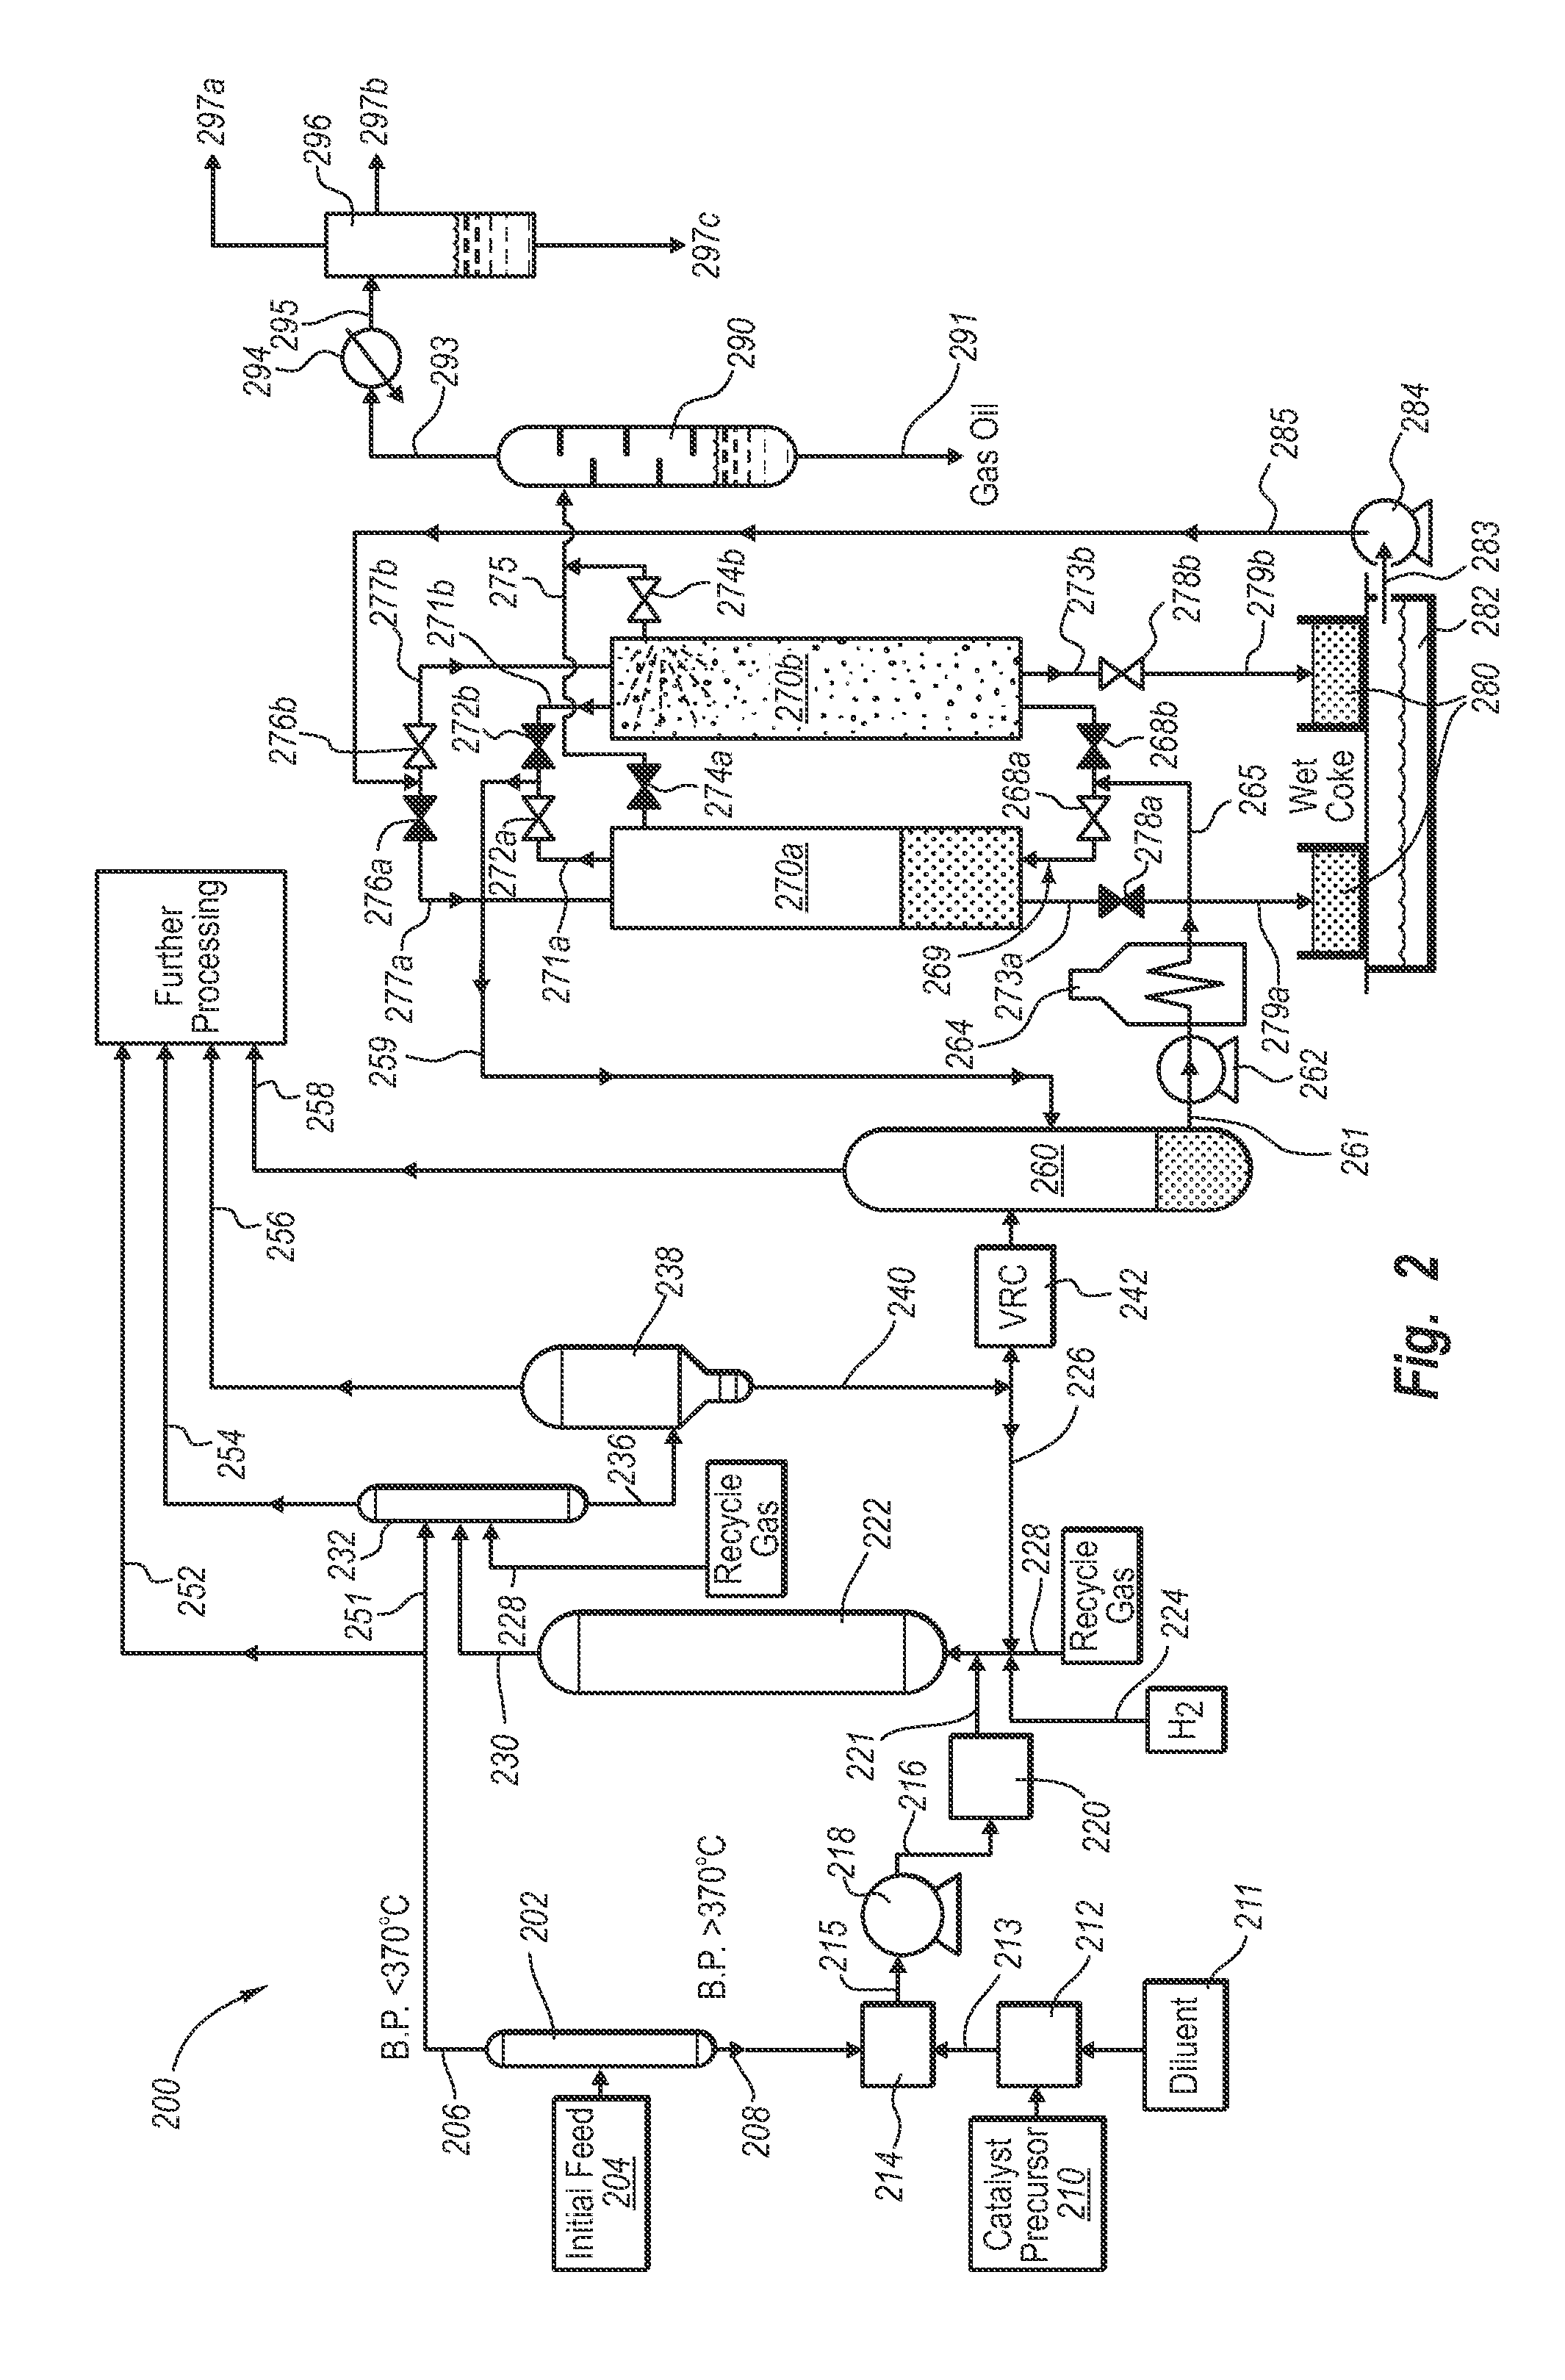 Methods and systems for upgrading heavy oil using catalytic hydrocracking and thermal coking